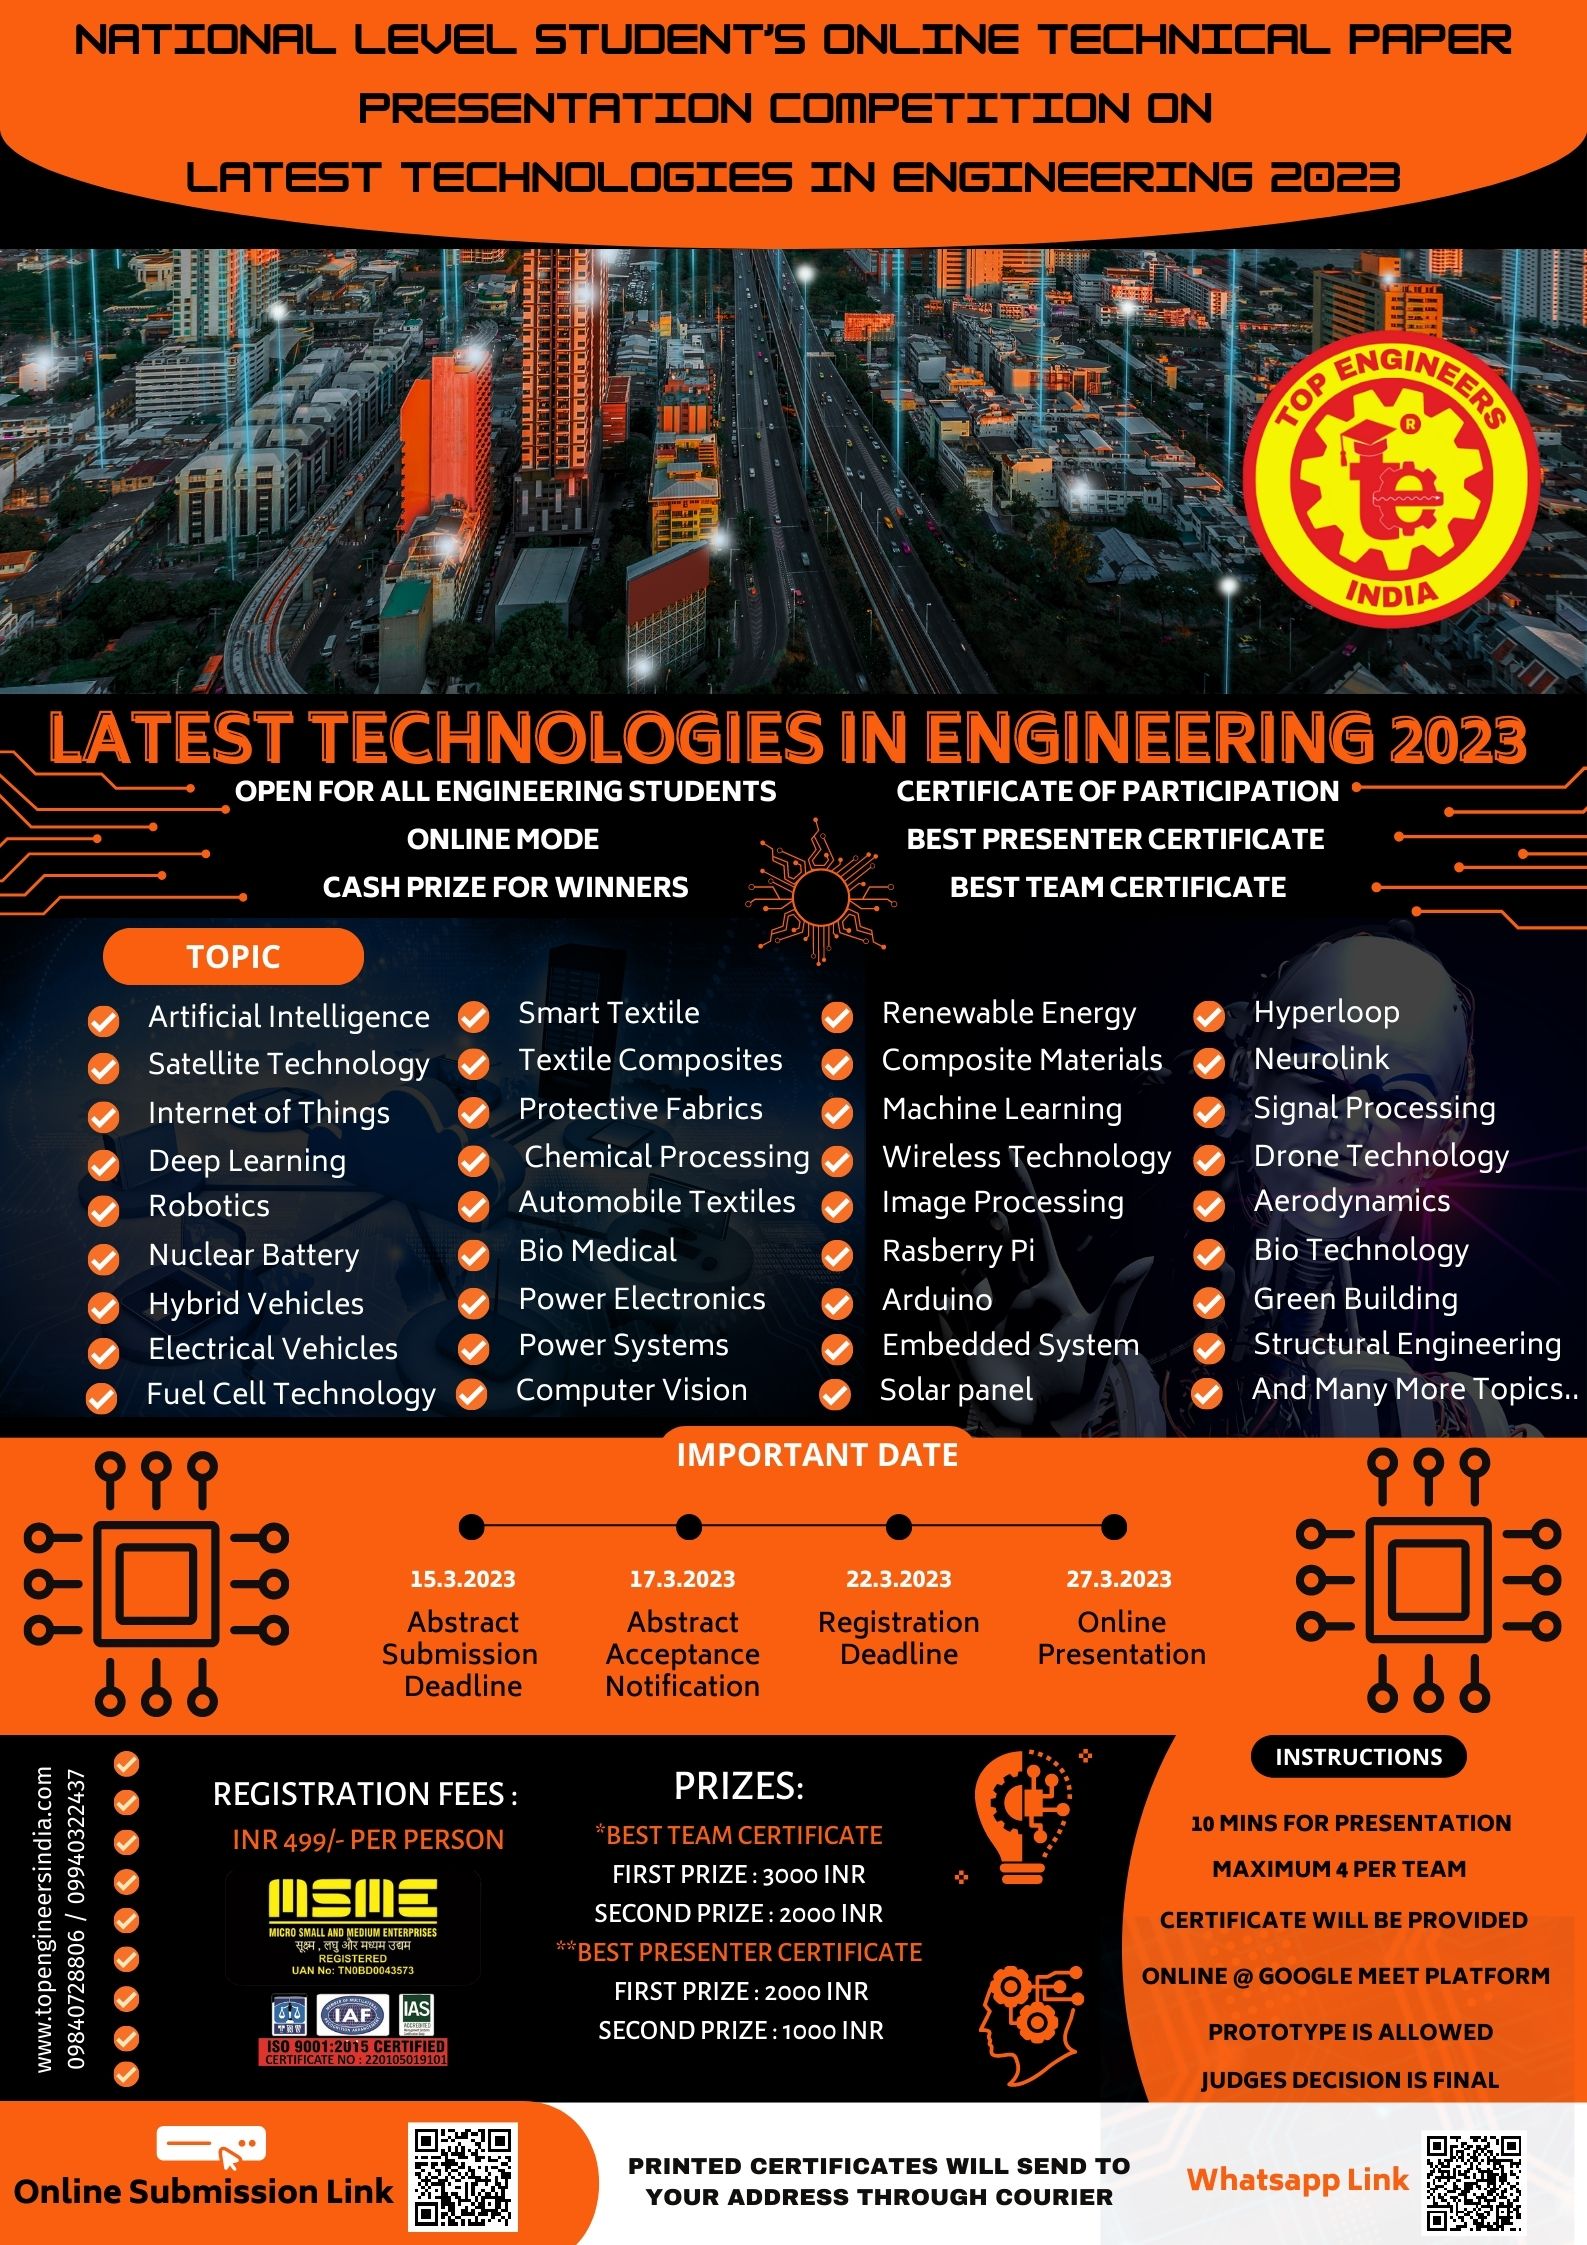 National Level Students Online Technical Paper Presentation Competition on Latest Technologies in Engineering 2023